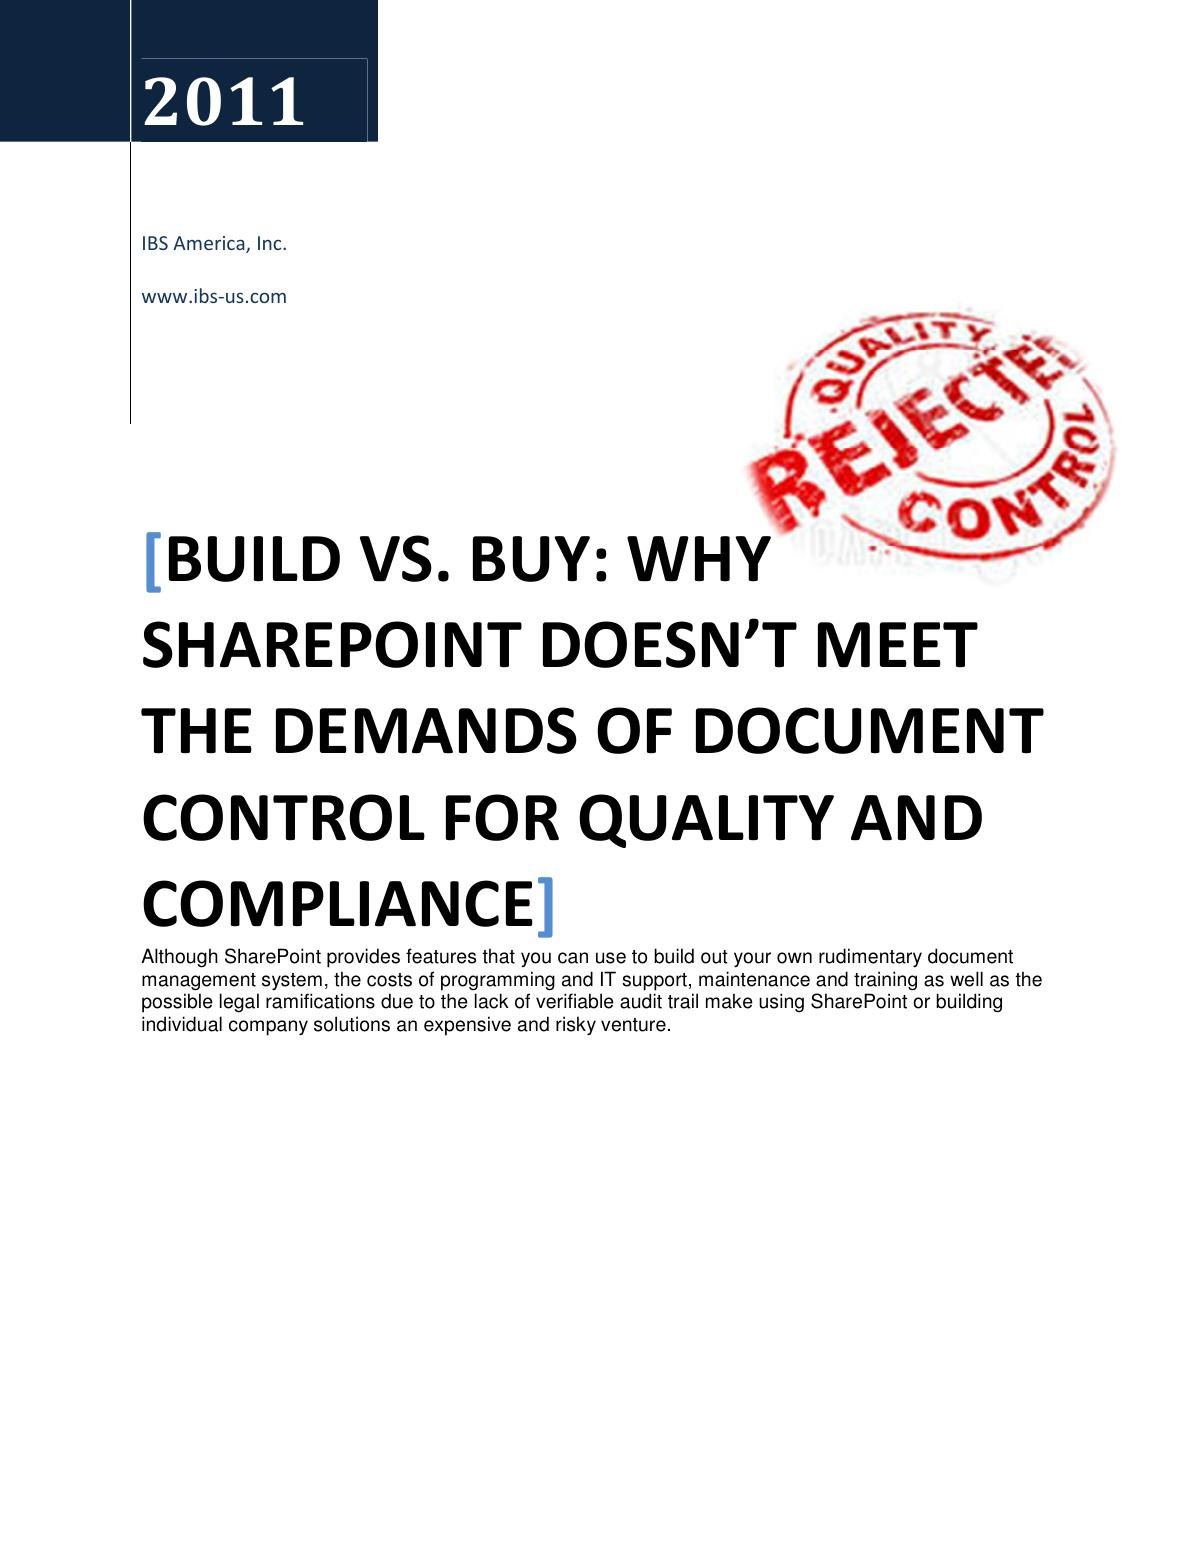 Build vs. Buy: Why Sharepoint Doesn’t Meet Document Control Demands for Quality and Compliance